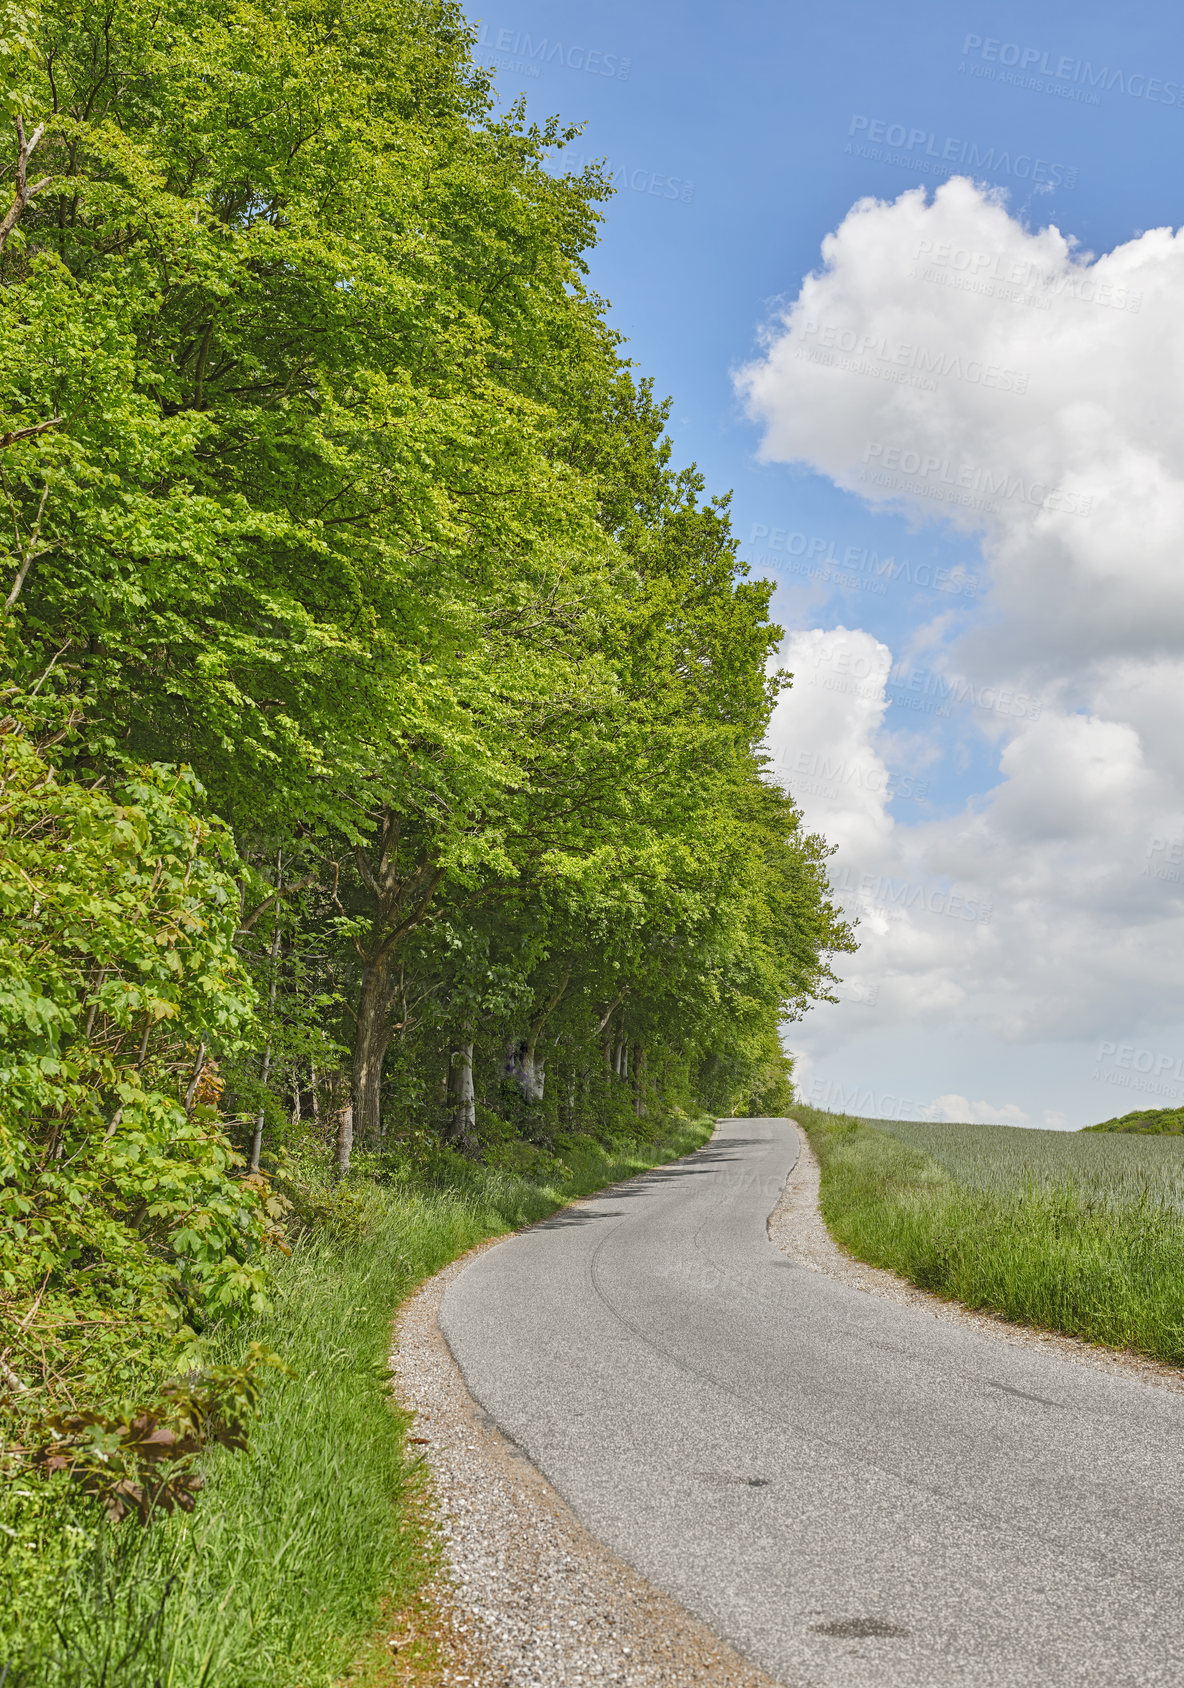 Buy stock photo Road between trees and a meadow in spring with a cloudy blue sky. Countryside street or avenue winding through a beautiful empty forest green grass land. A scenic nature path for traveling or hiking